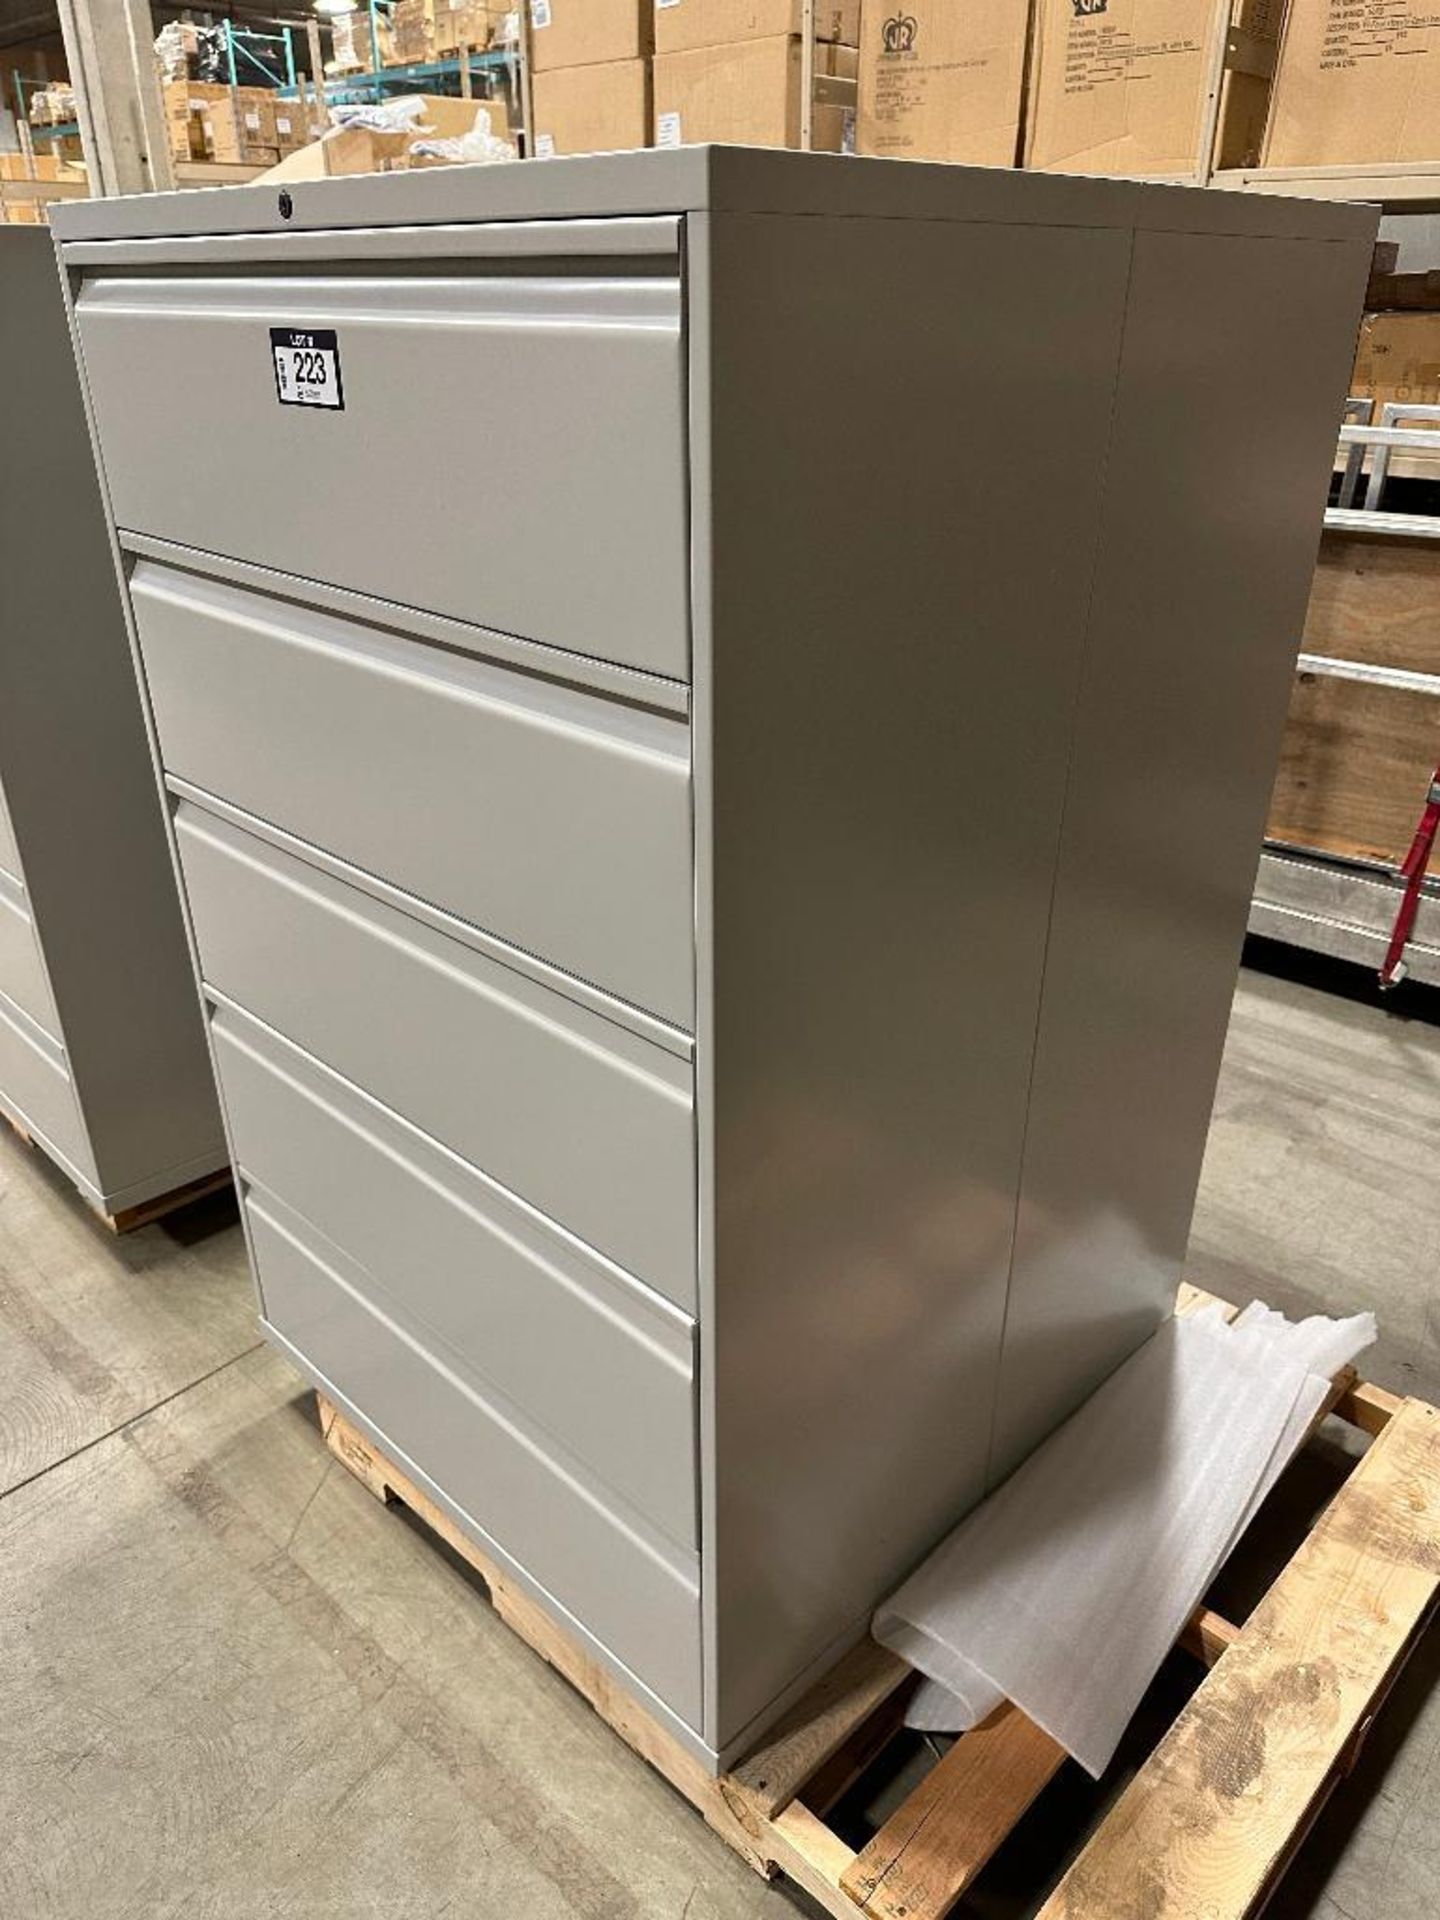 Lot of (2) 5-Drawer Lateral Filing Cabinet (Locked w/ No Key) - Image 2 of 3